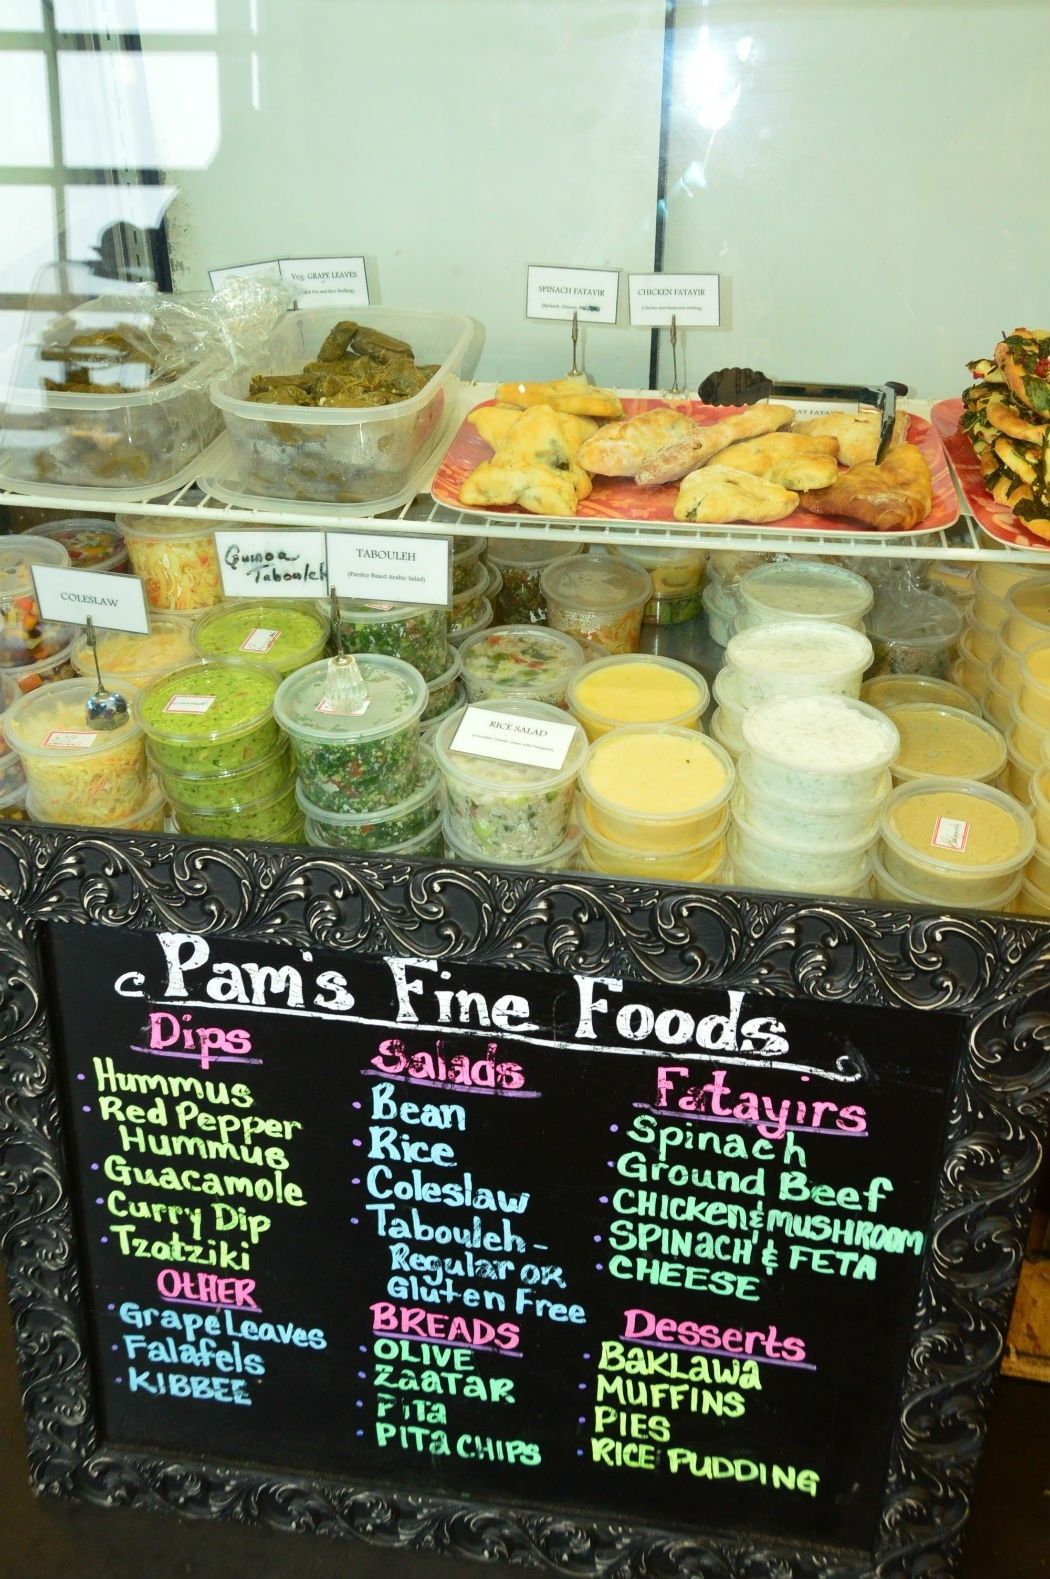 pam's fine foods dips menu and products